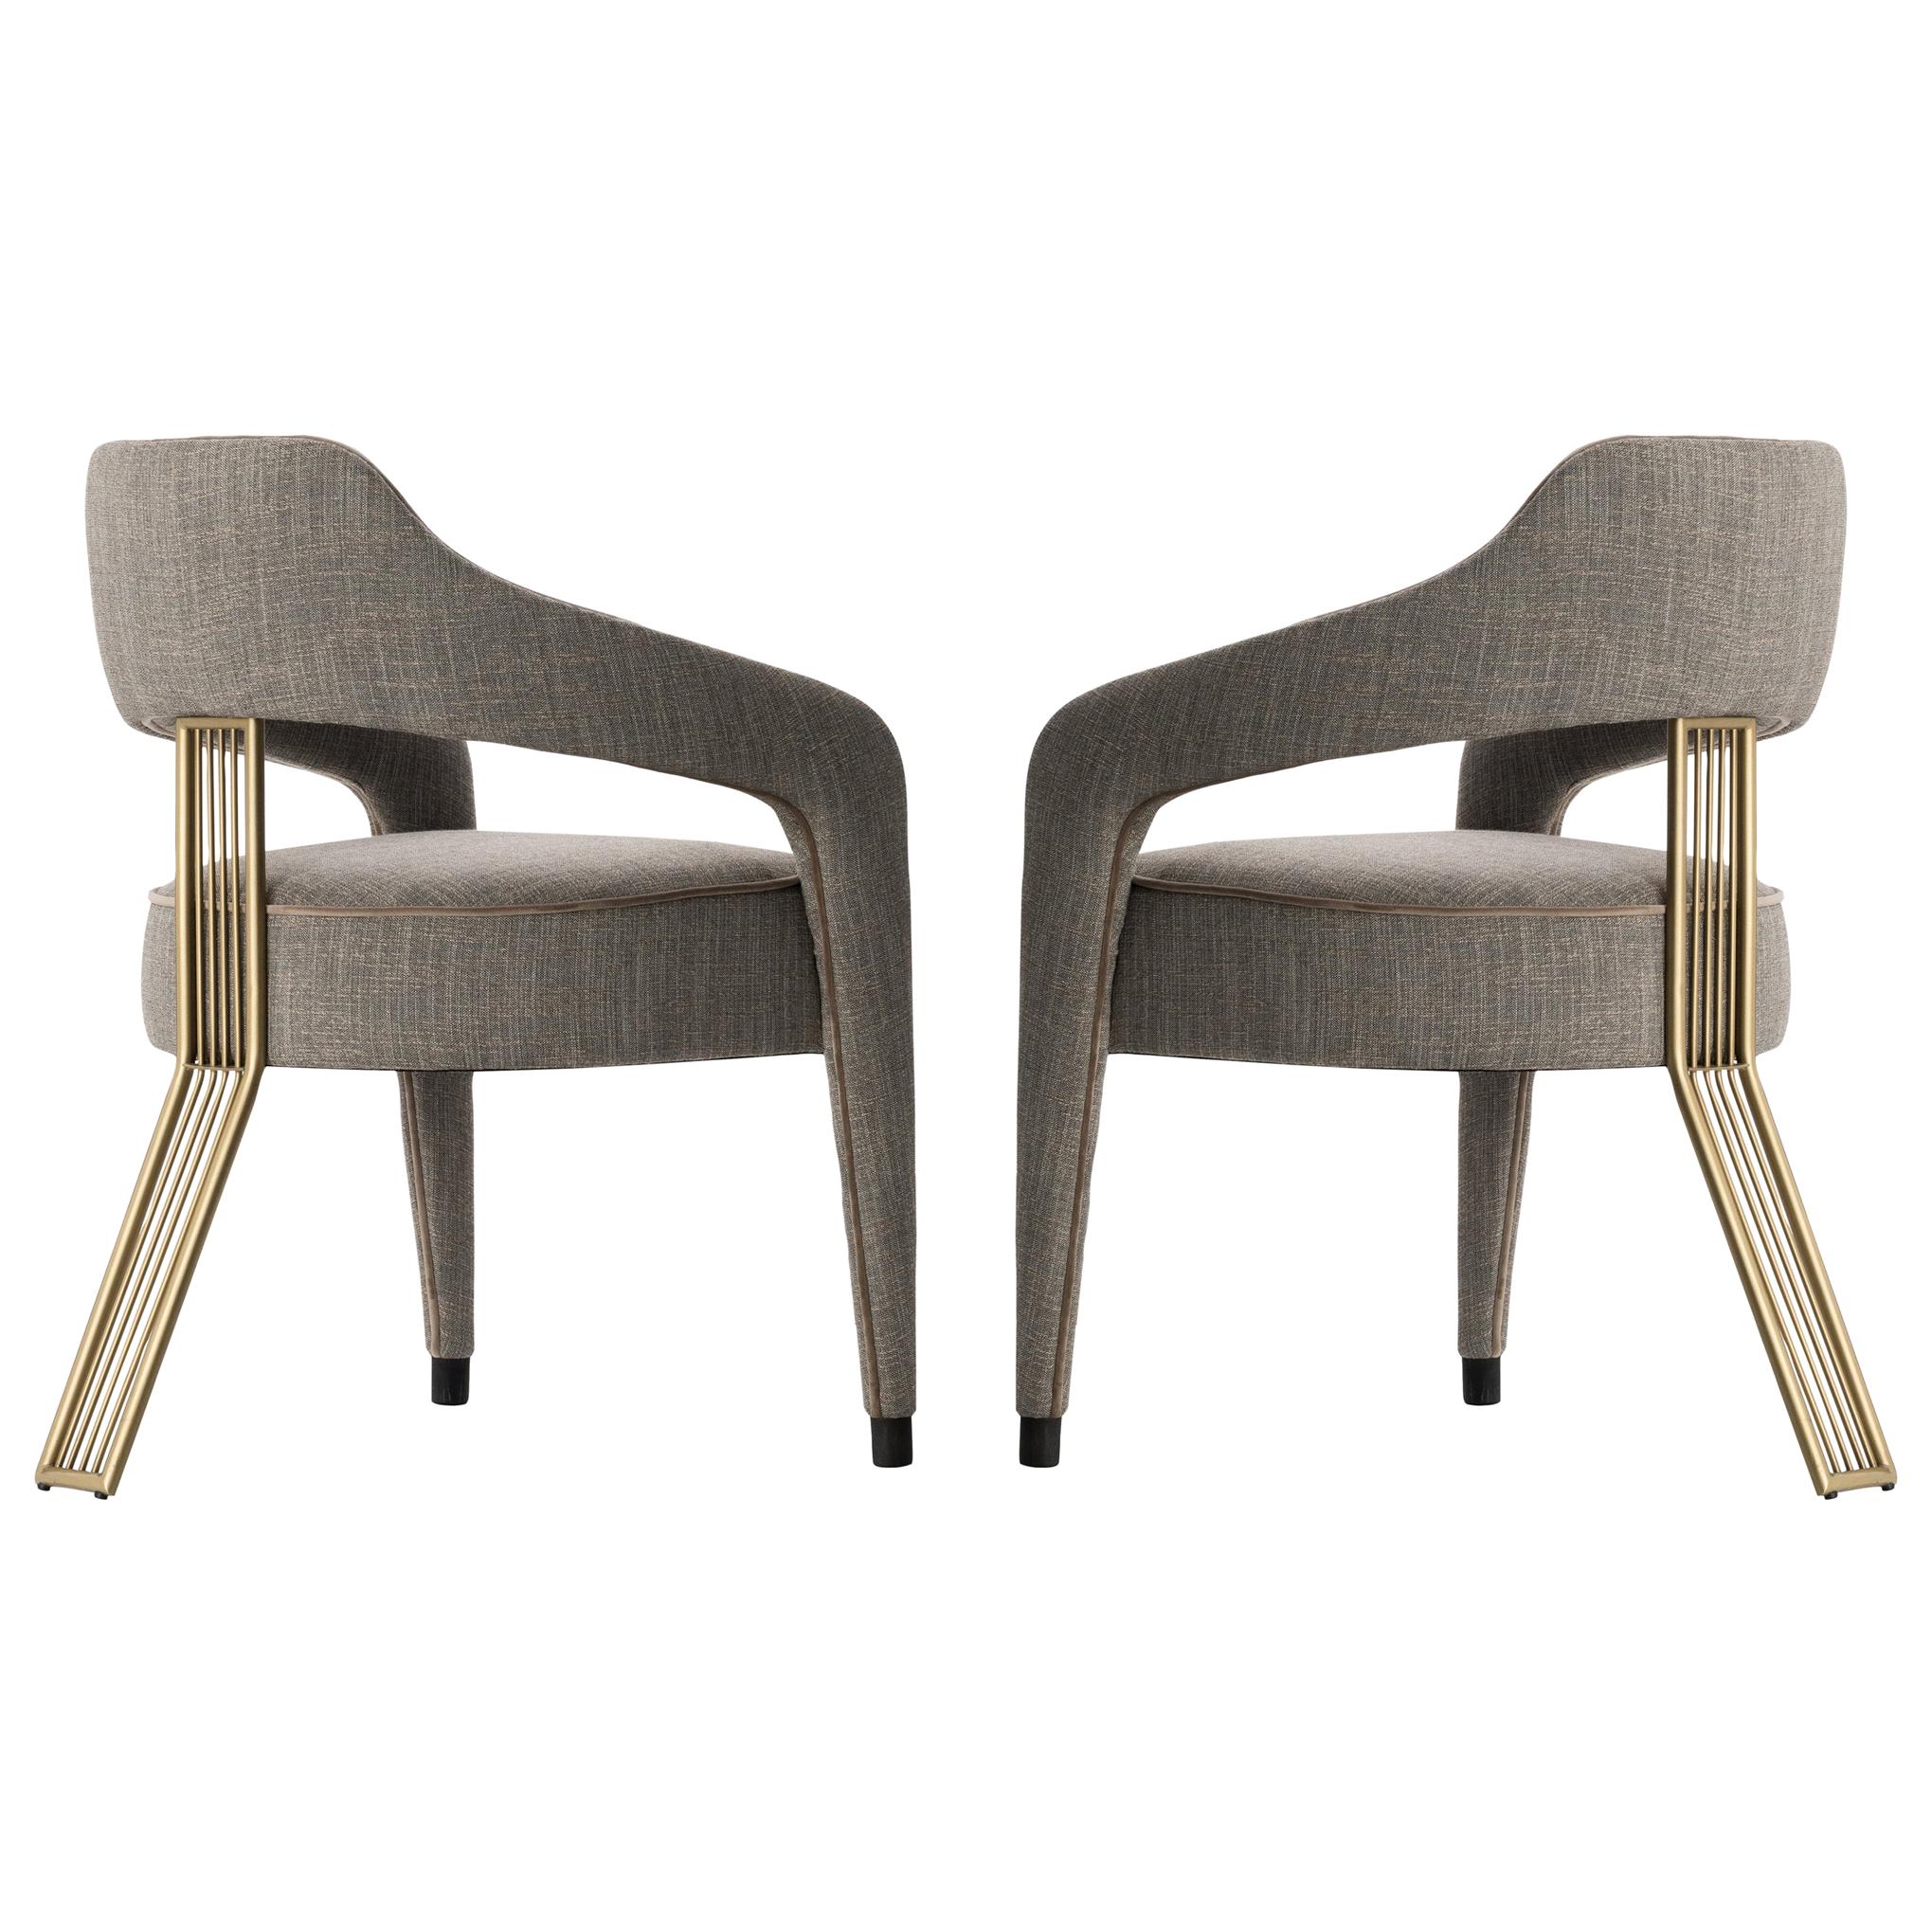 Set of 2 Invicta II Dining Chair with Metal Gilded Back Leg